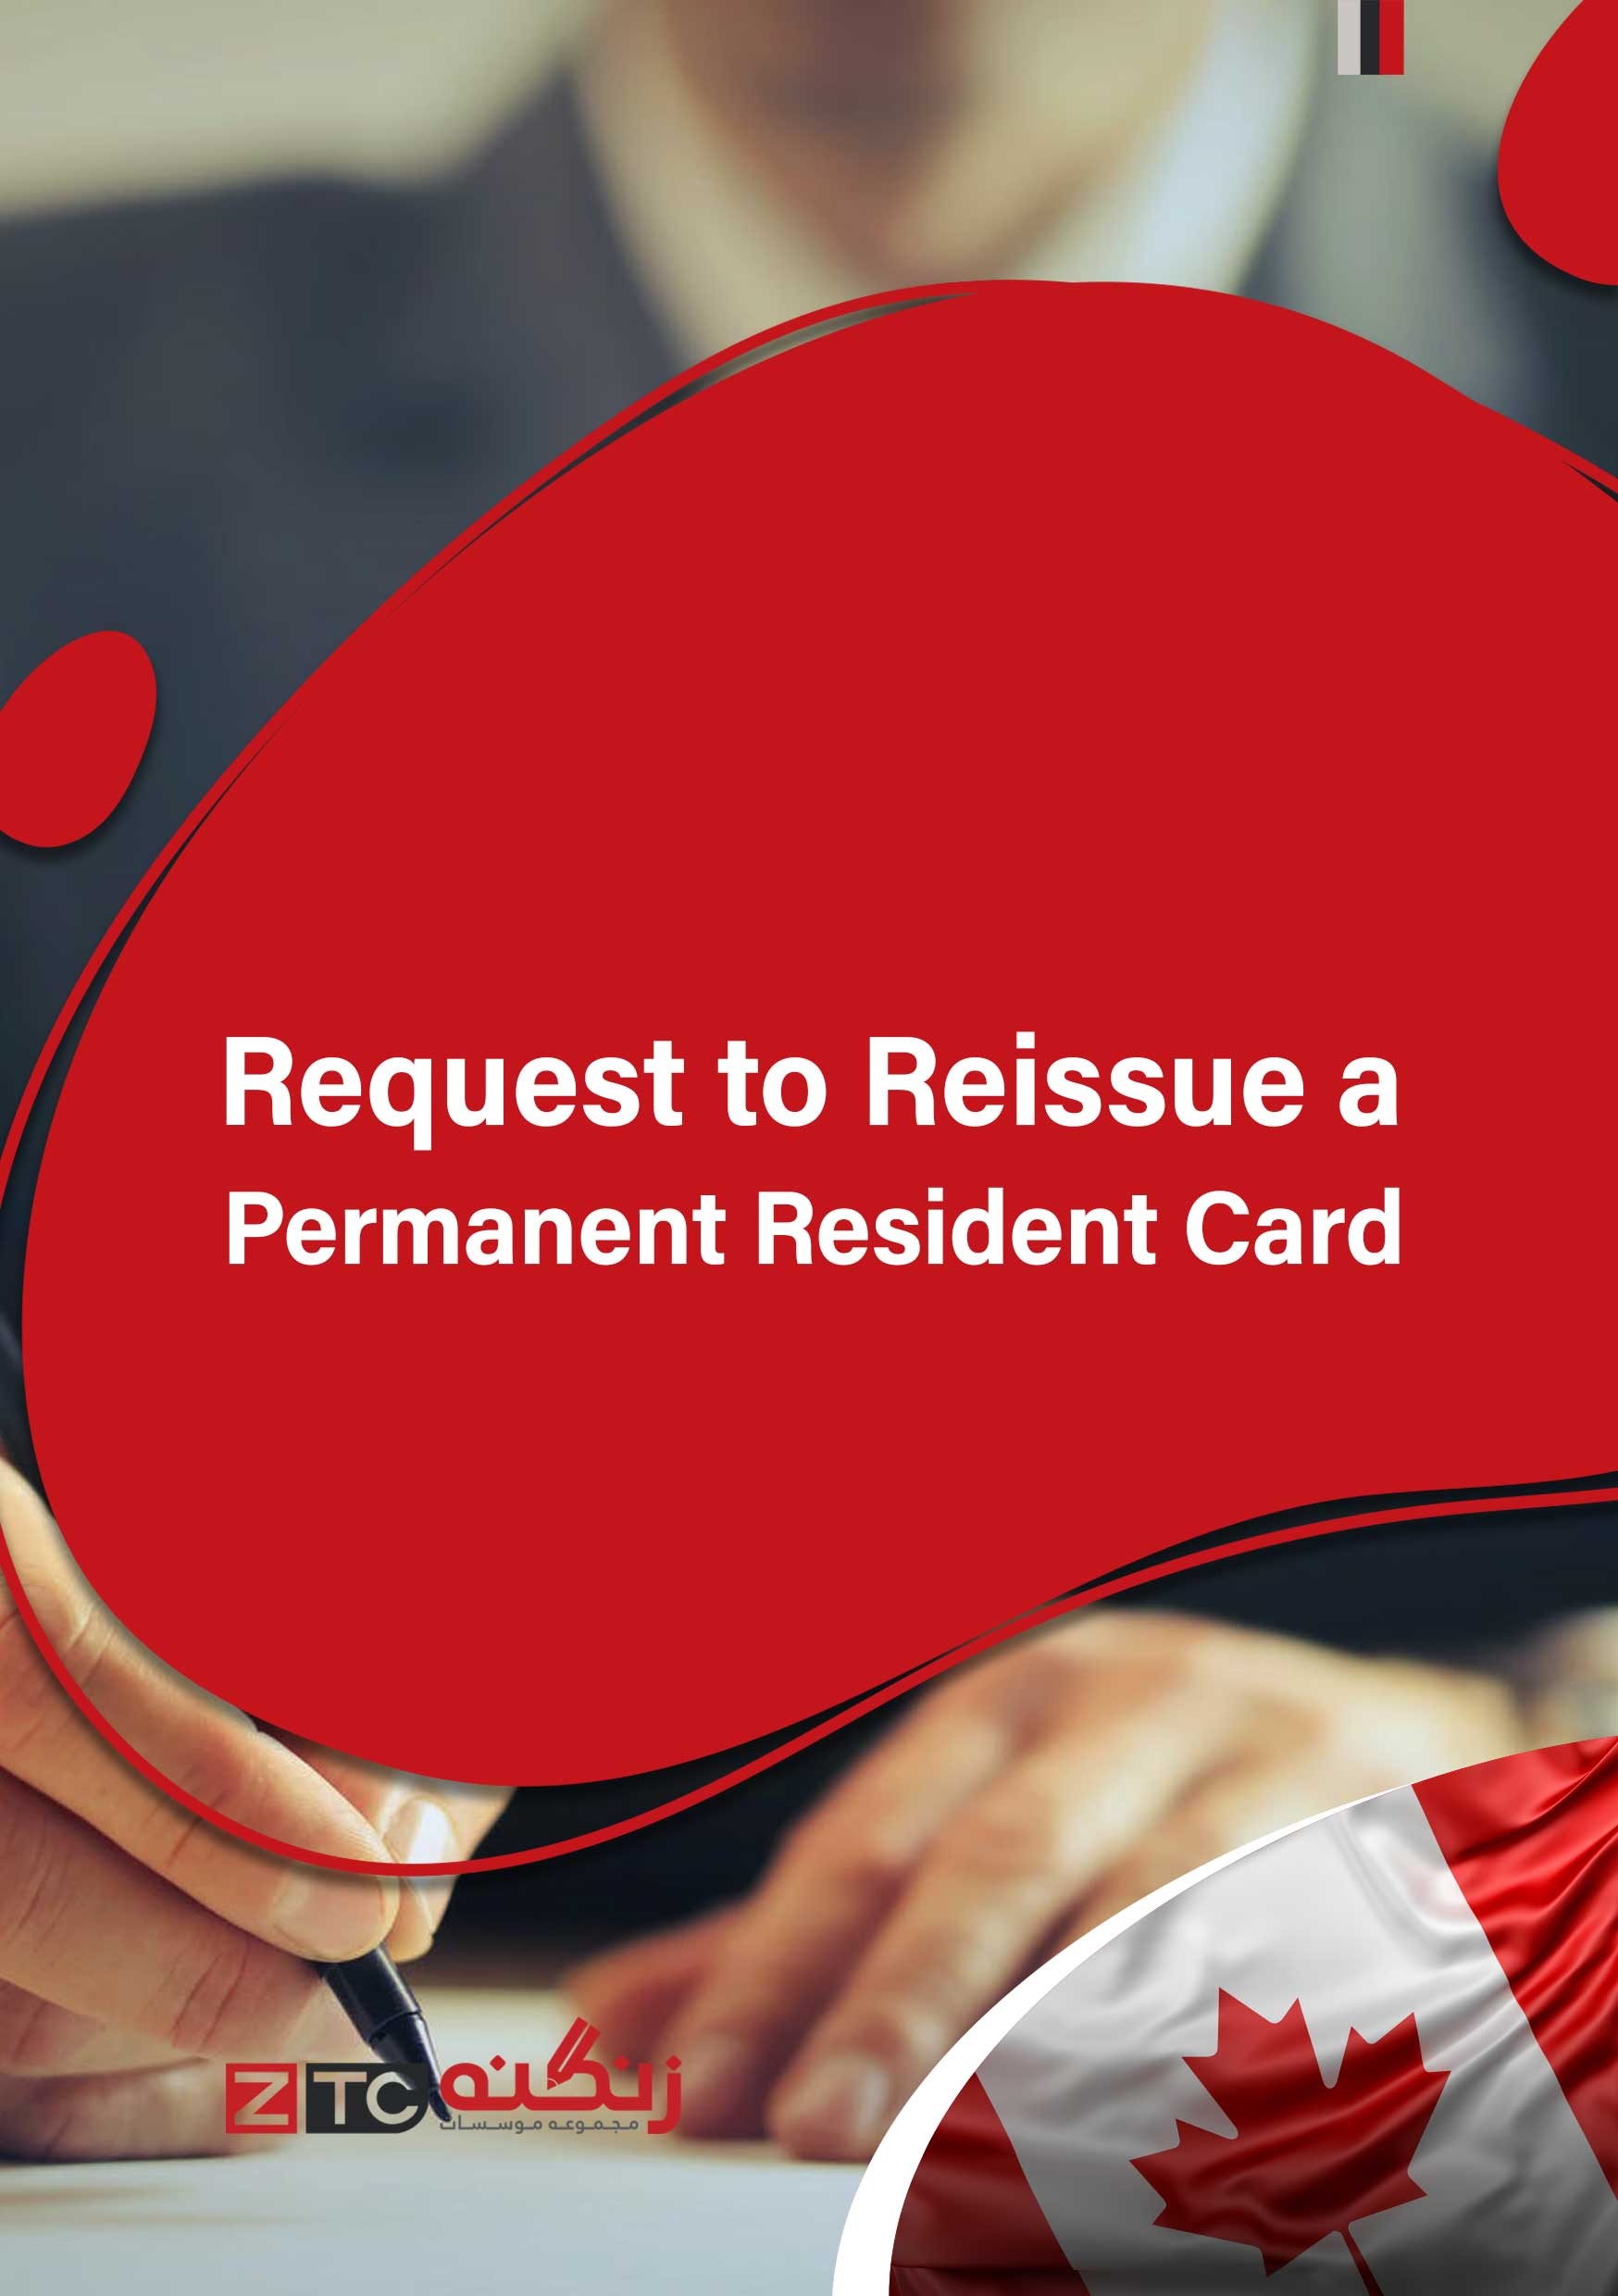 Request to Reissue a Permanent Resident Card